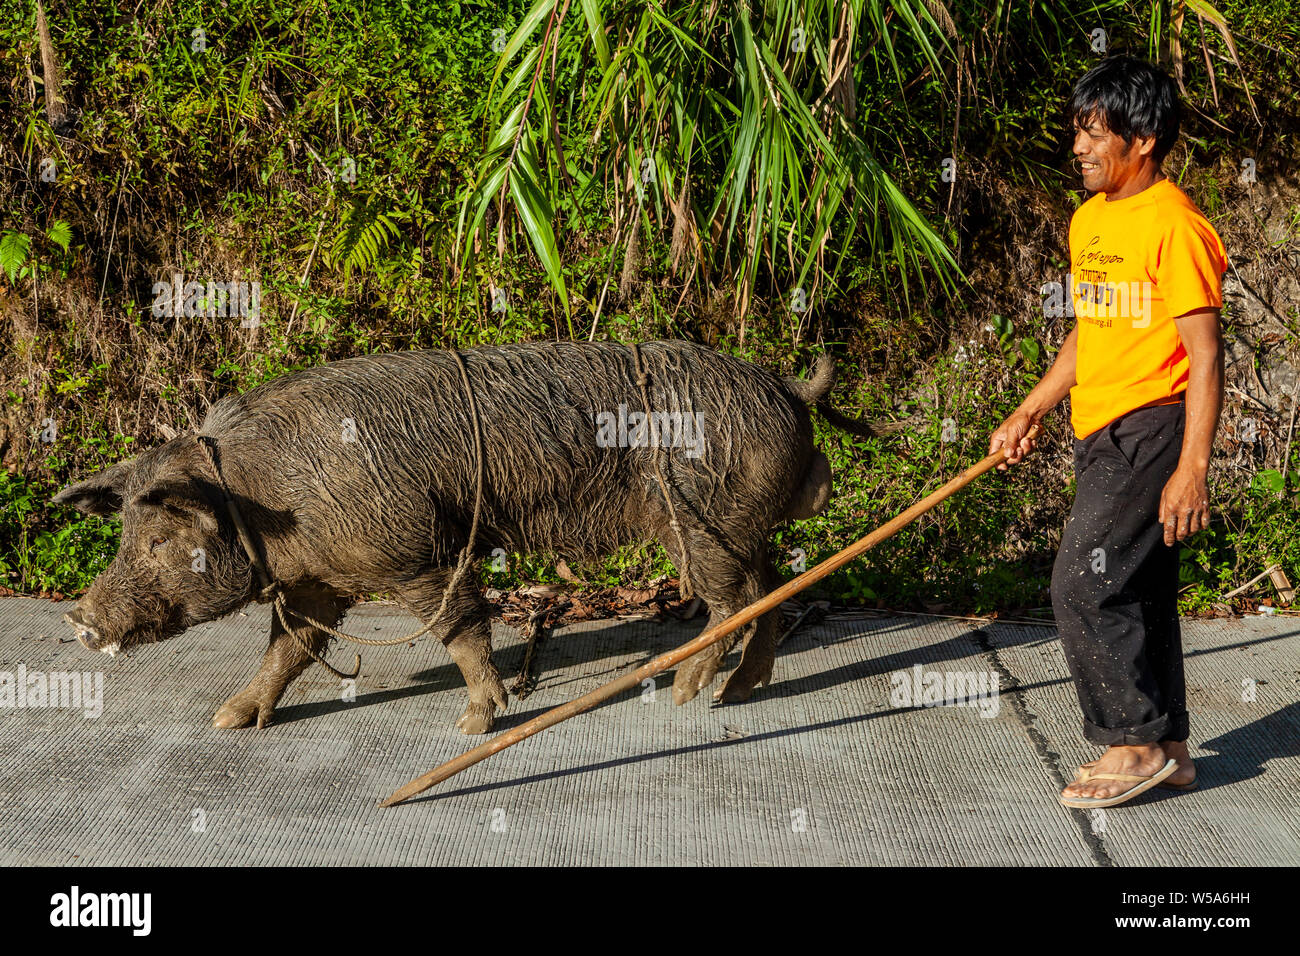 A Man With A Stick Walking With His Pig, Banaue, Luzon, The Philippines Stock Photo